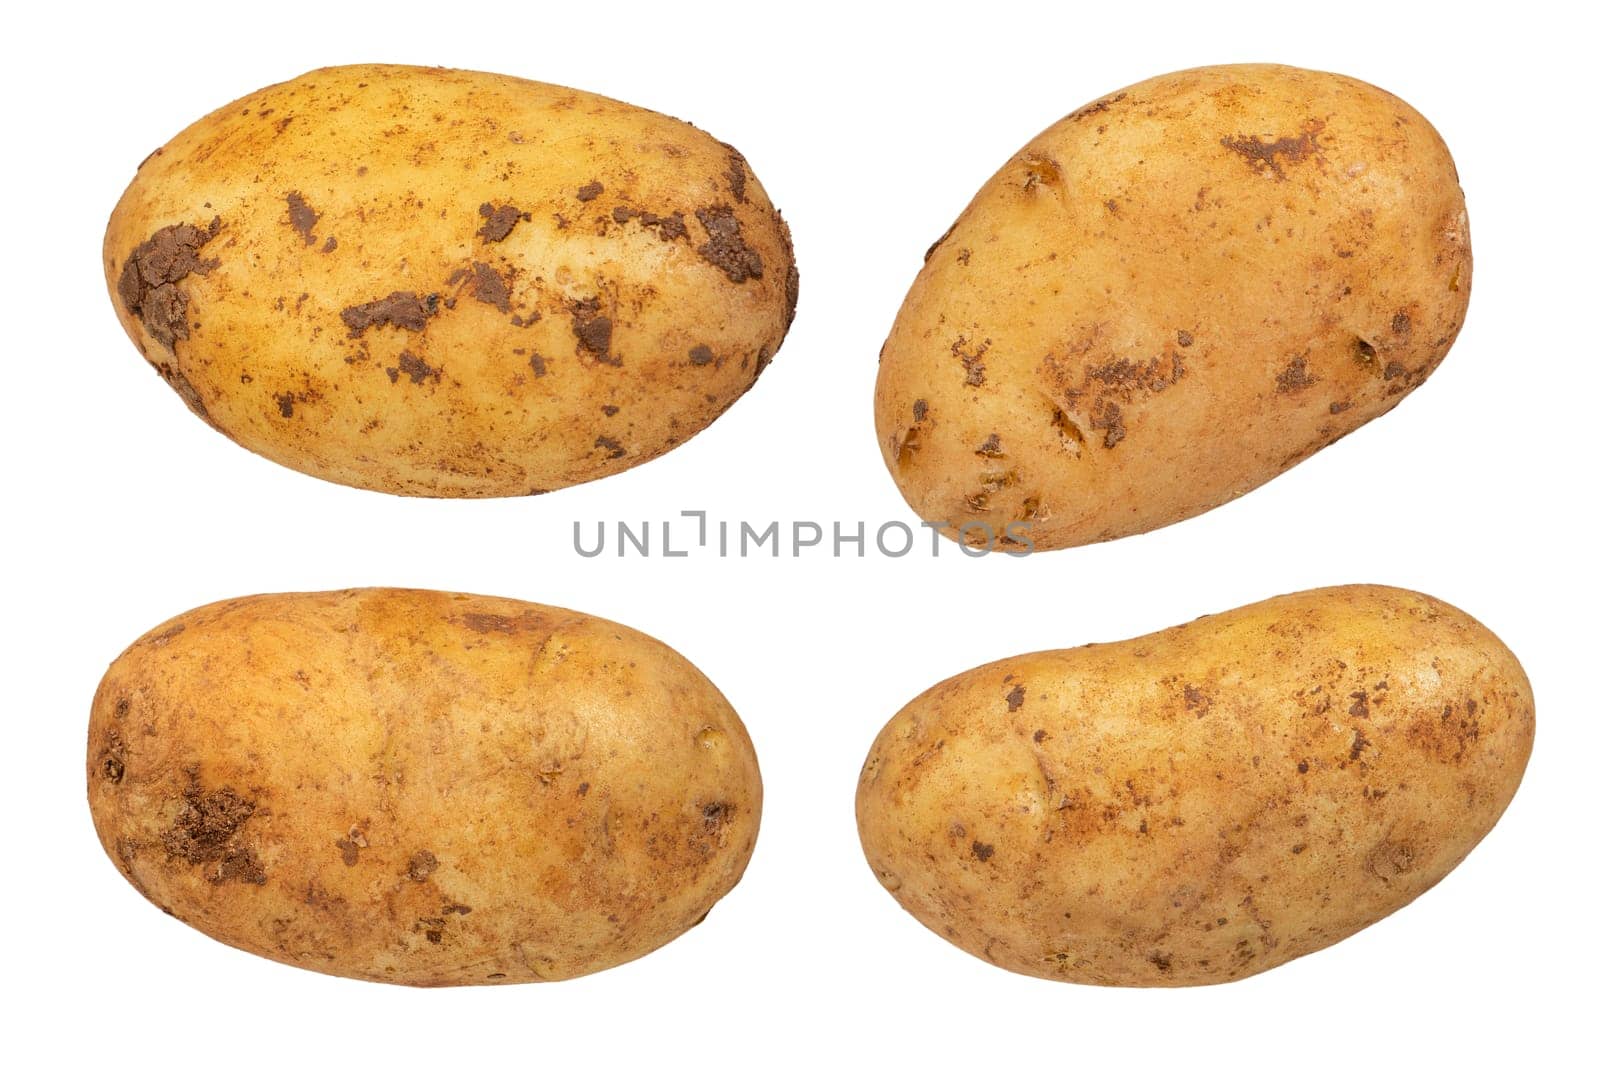 Flying vegetables. Unpeeled potato wedges with peel isolated on white background. The concept of not healthy eating or obesity from potatoes. To be inserted into a design or project